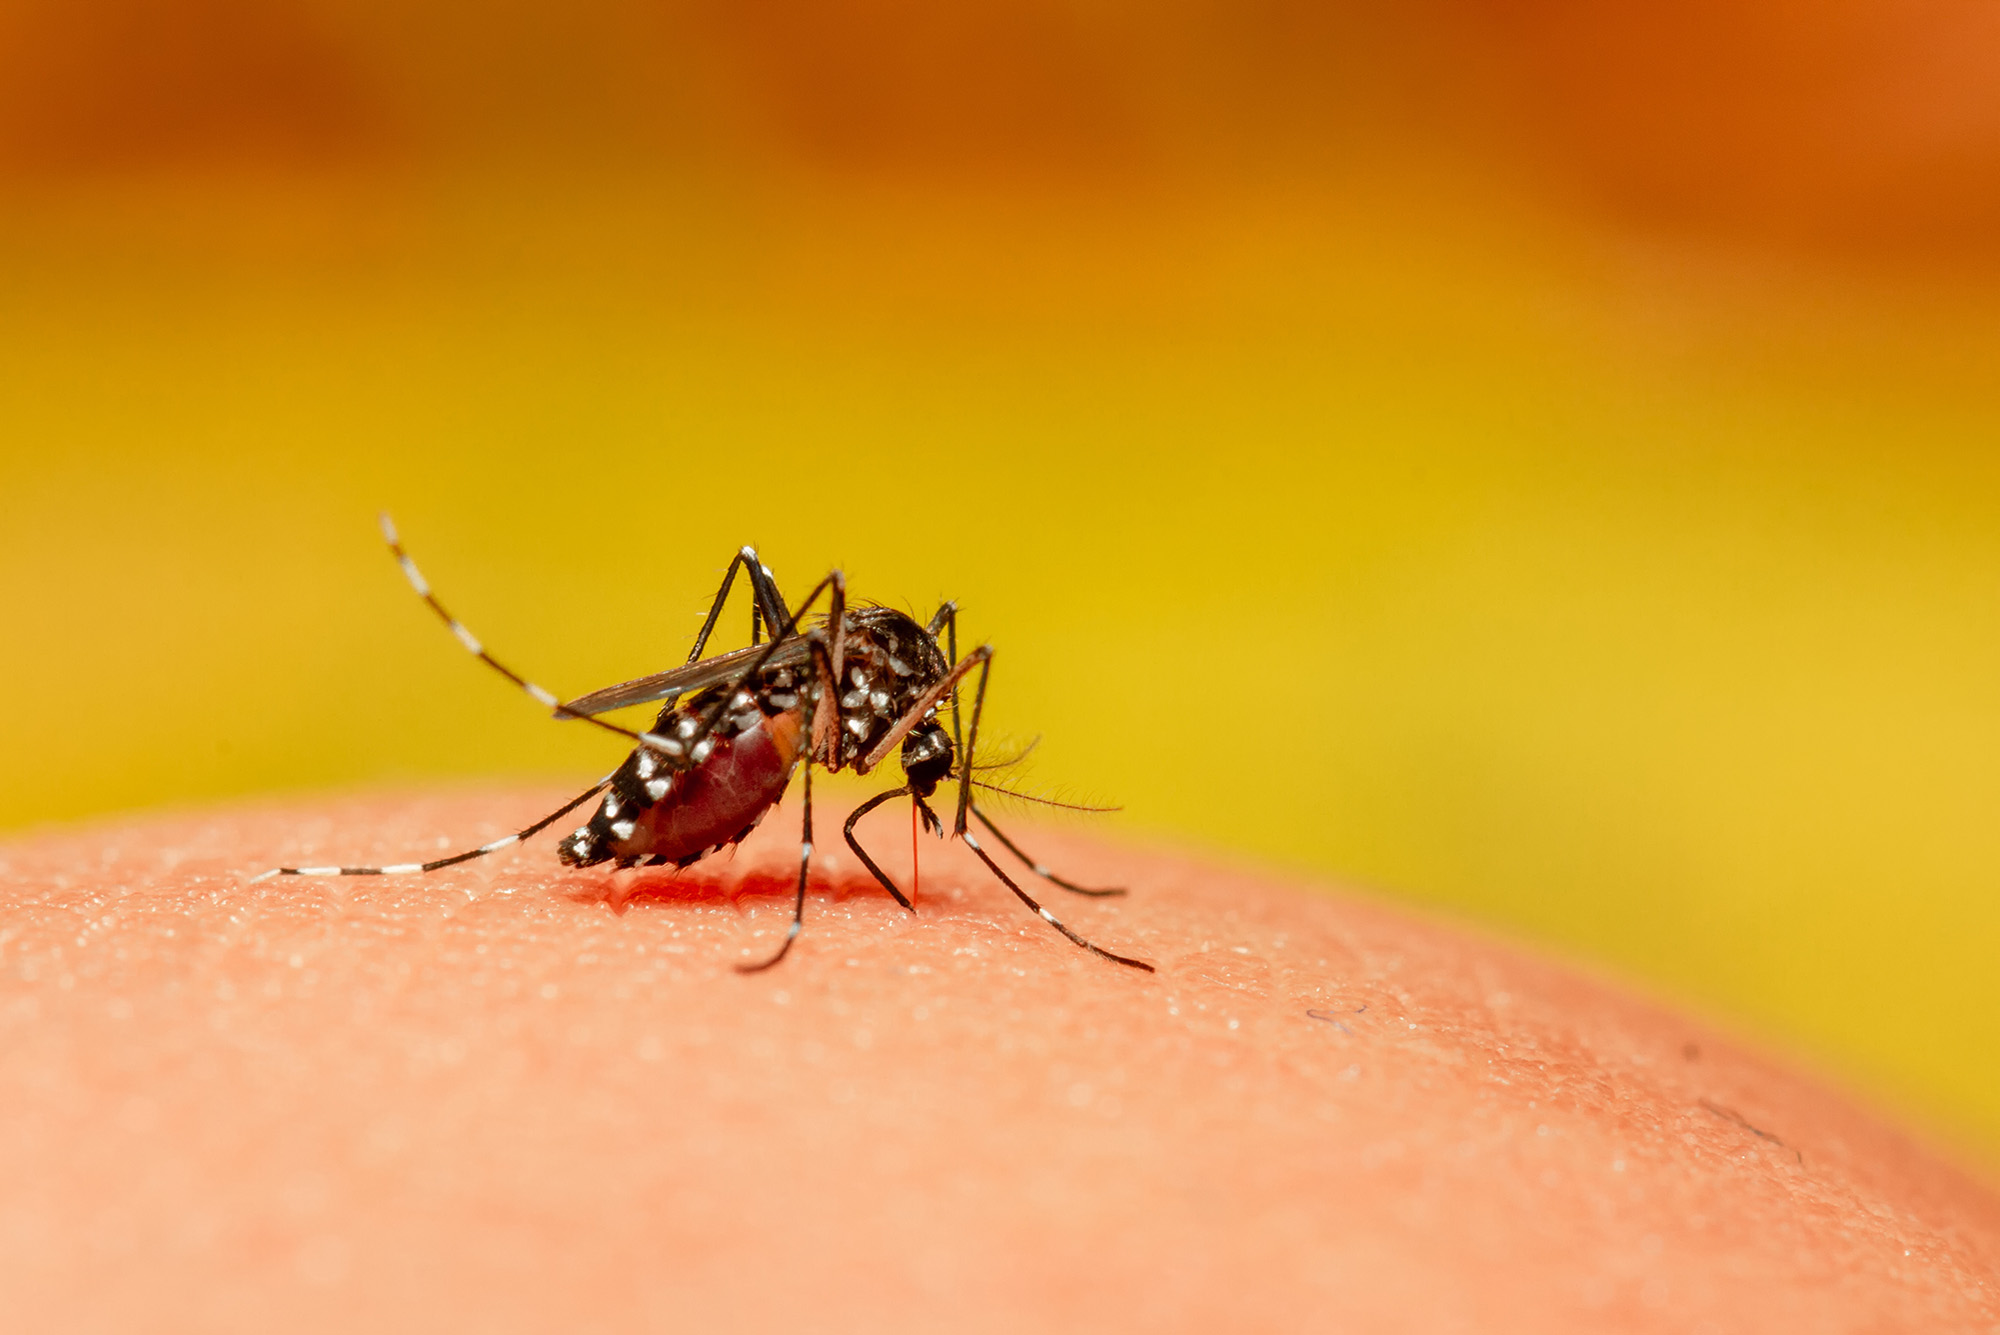 Closeup photo of an Aedes aegypti mosquito sucking blood off caucasian skin. A white spotted insect sits atop skin and bites.